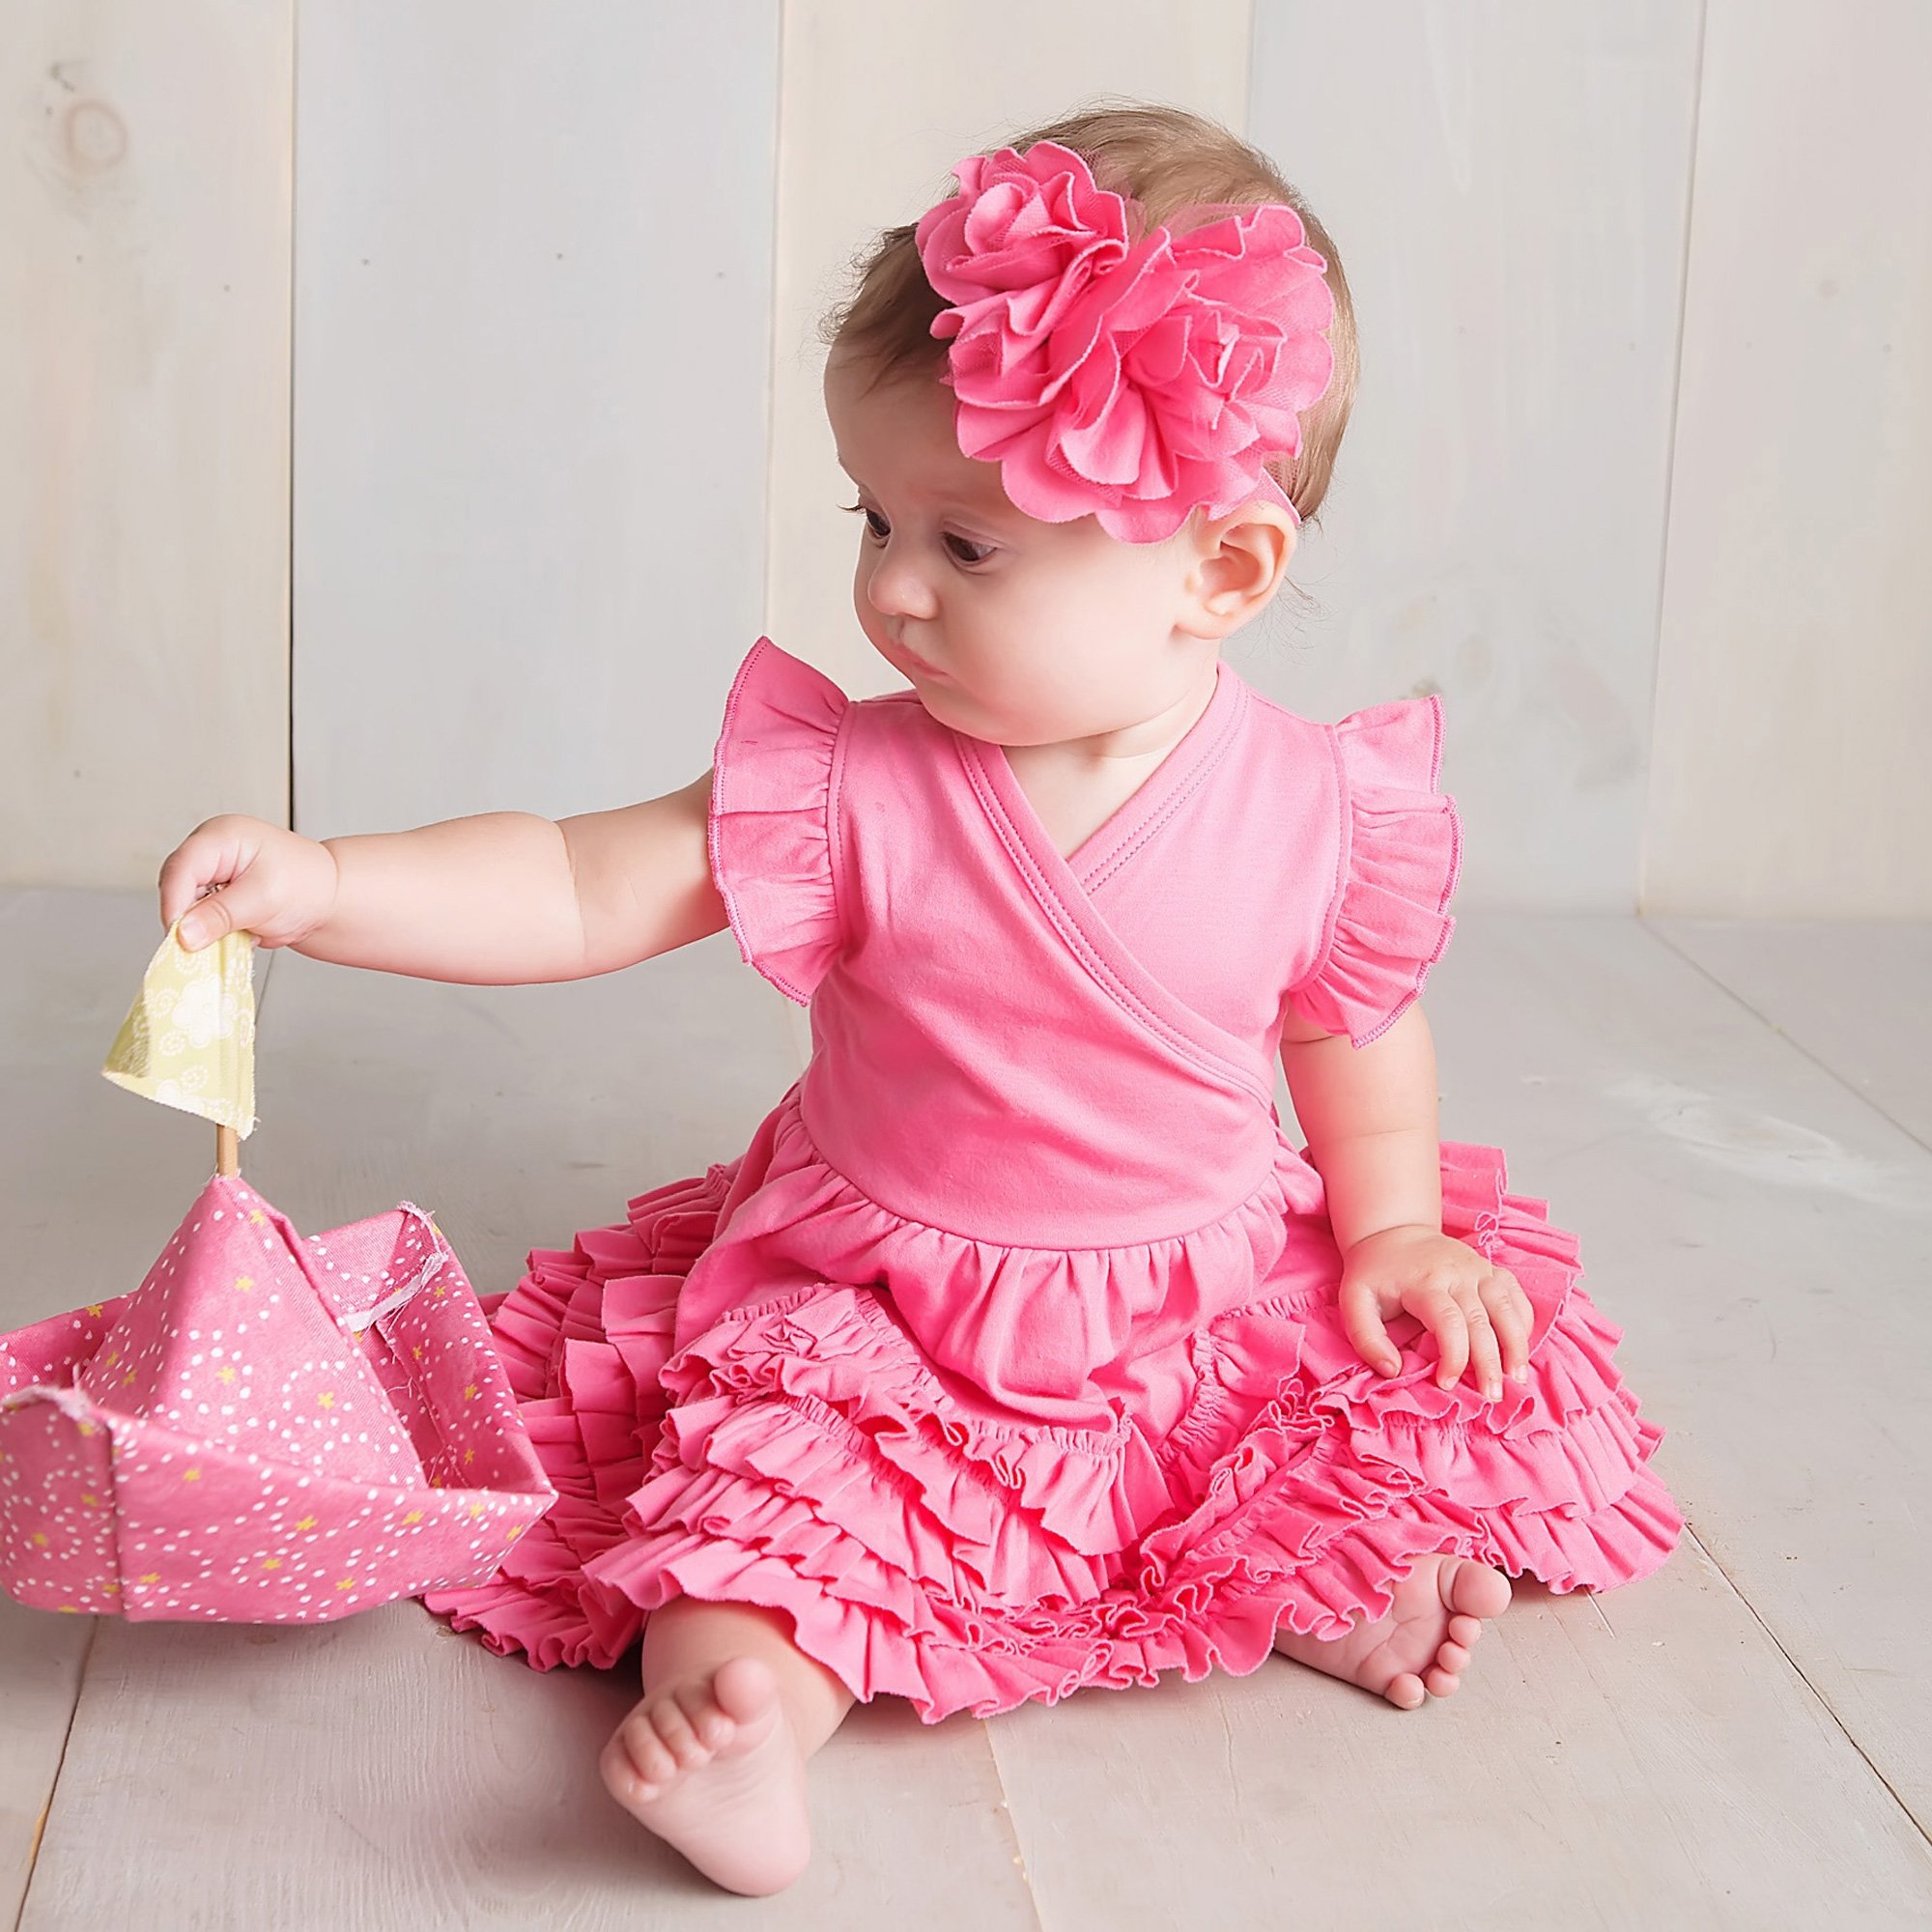 Lemon Loves Layette "Mia" Dress for Baby and Toddlers in Pink Lemonade